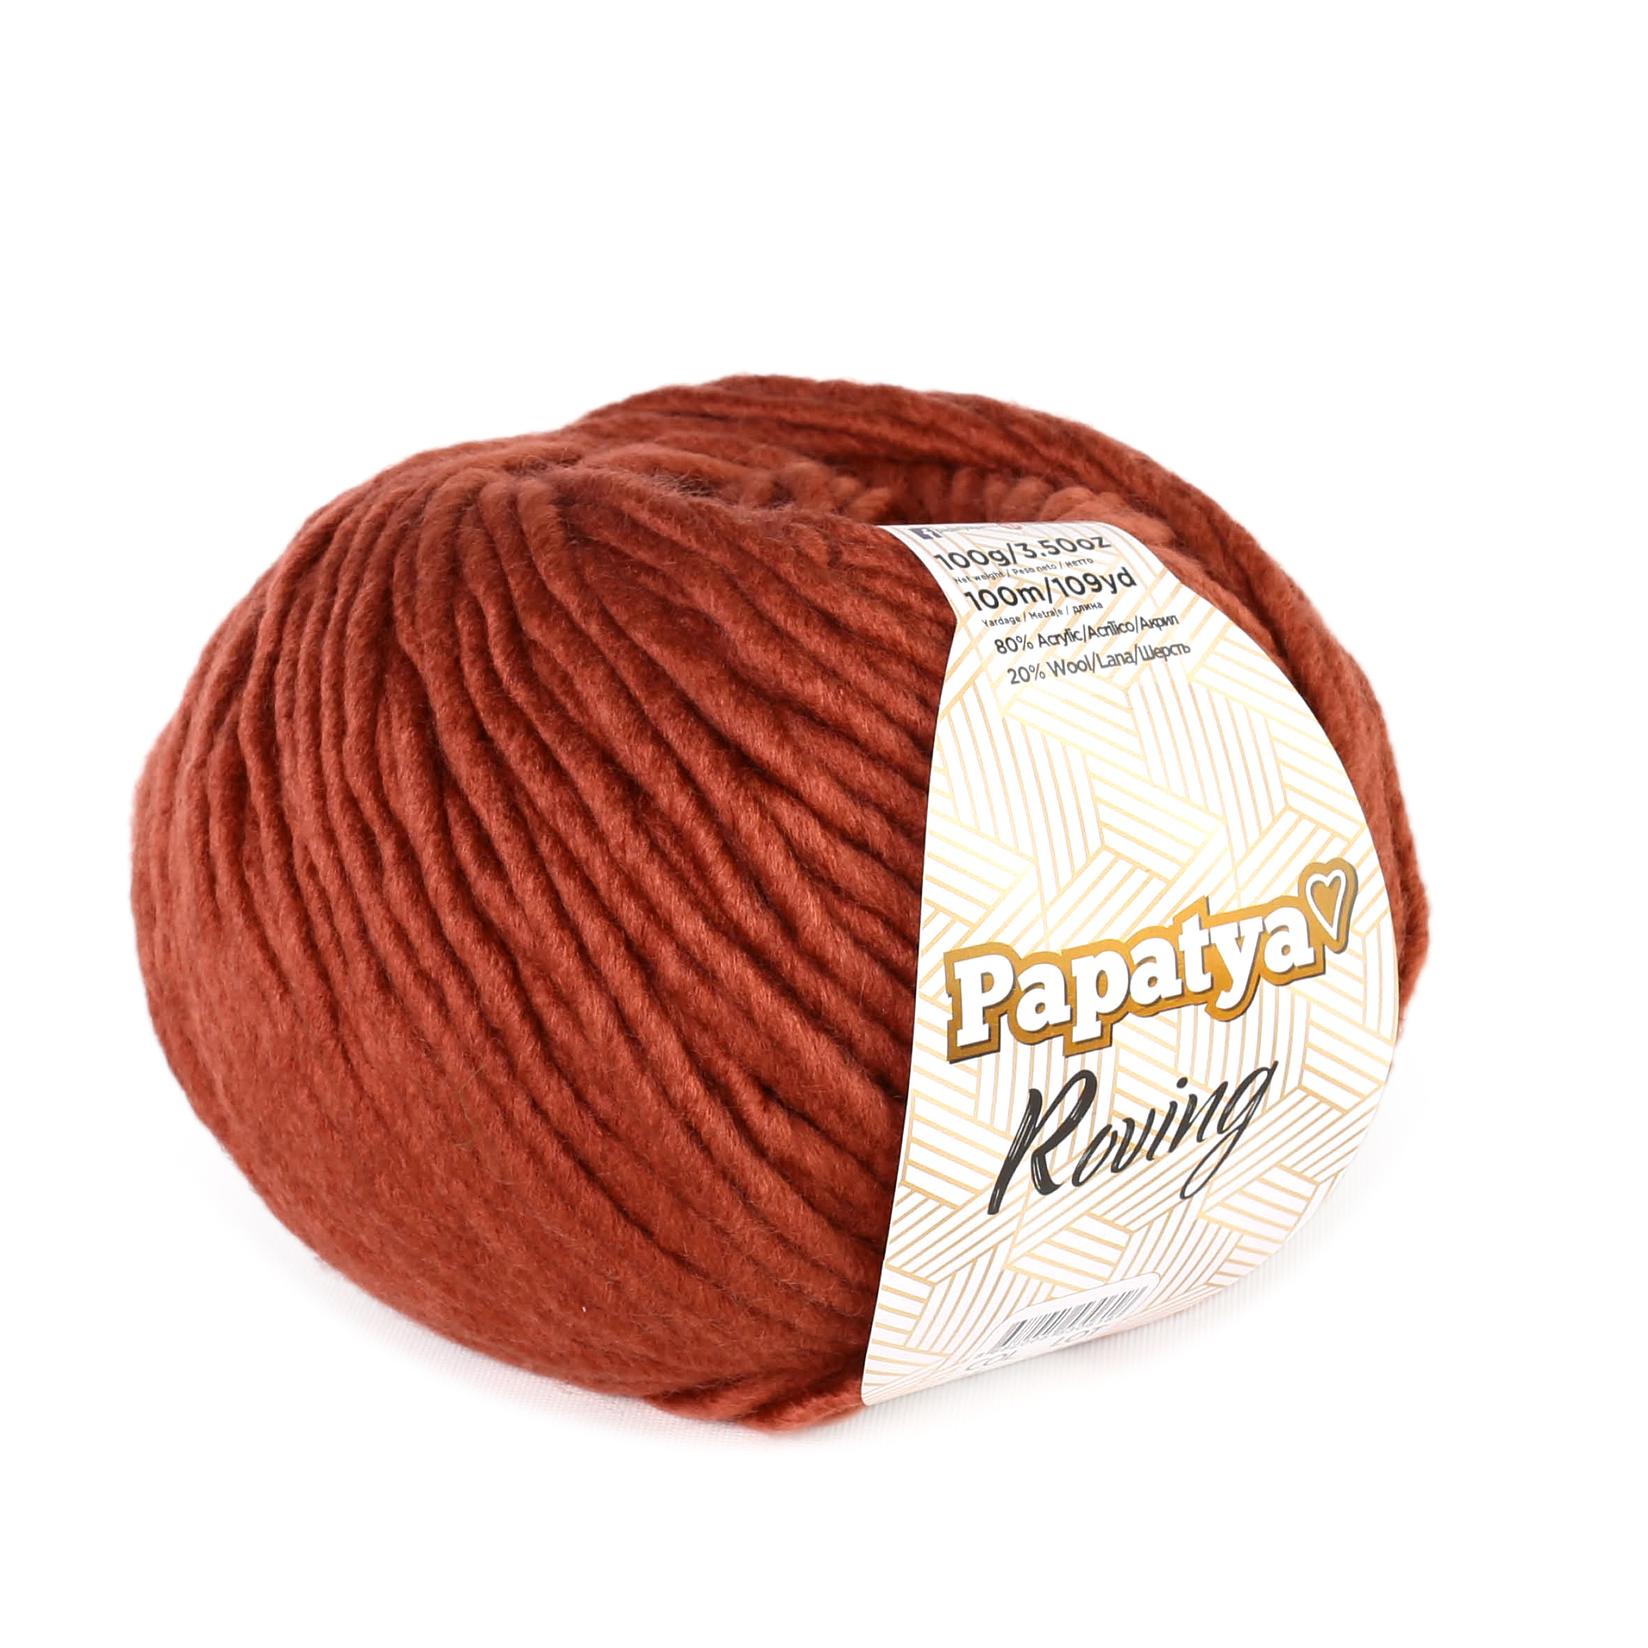 Selected image for PAPATYA Vunica Roving 12